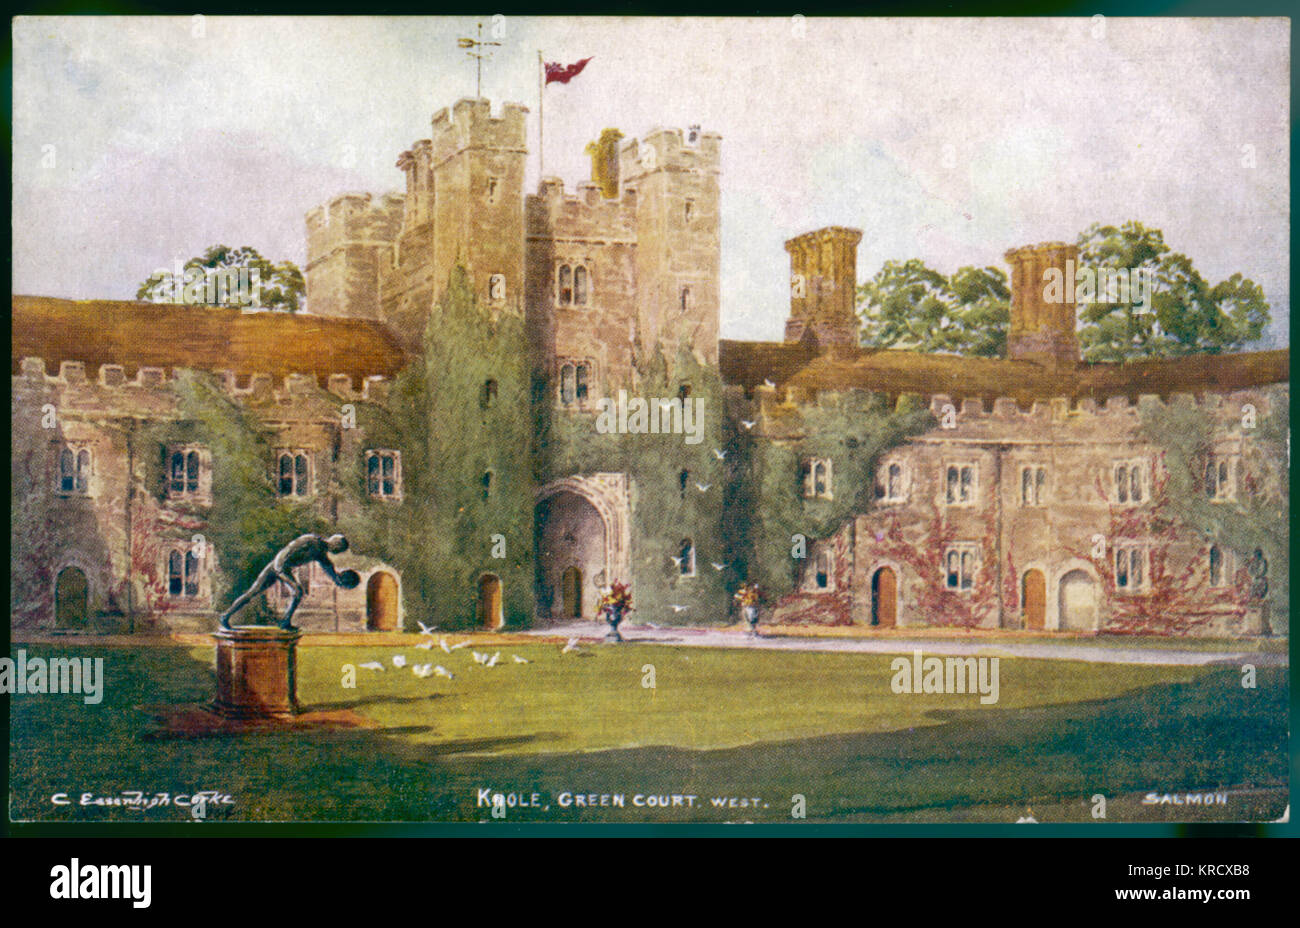 KNOLE/GREEN COURT WEST Foto Stock